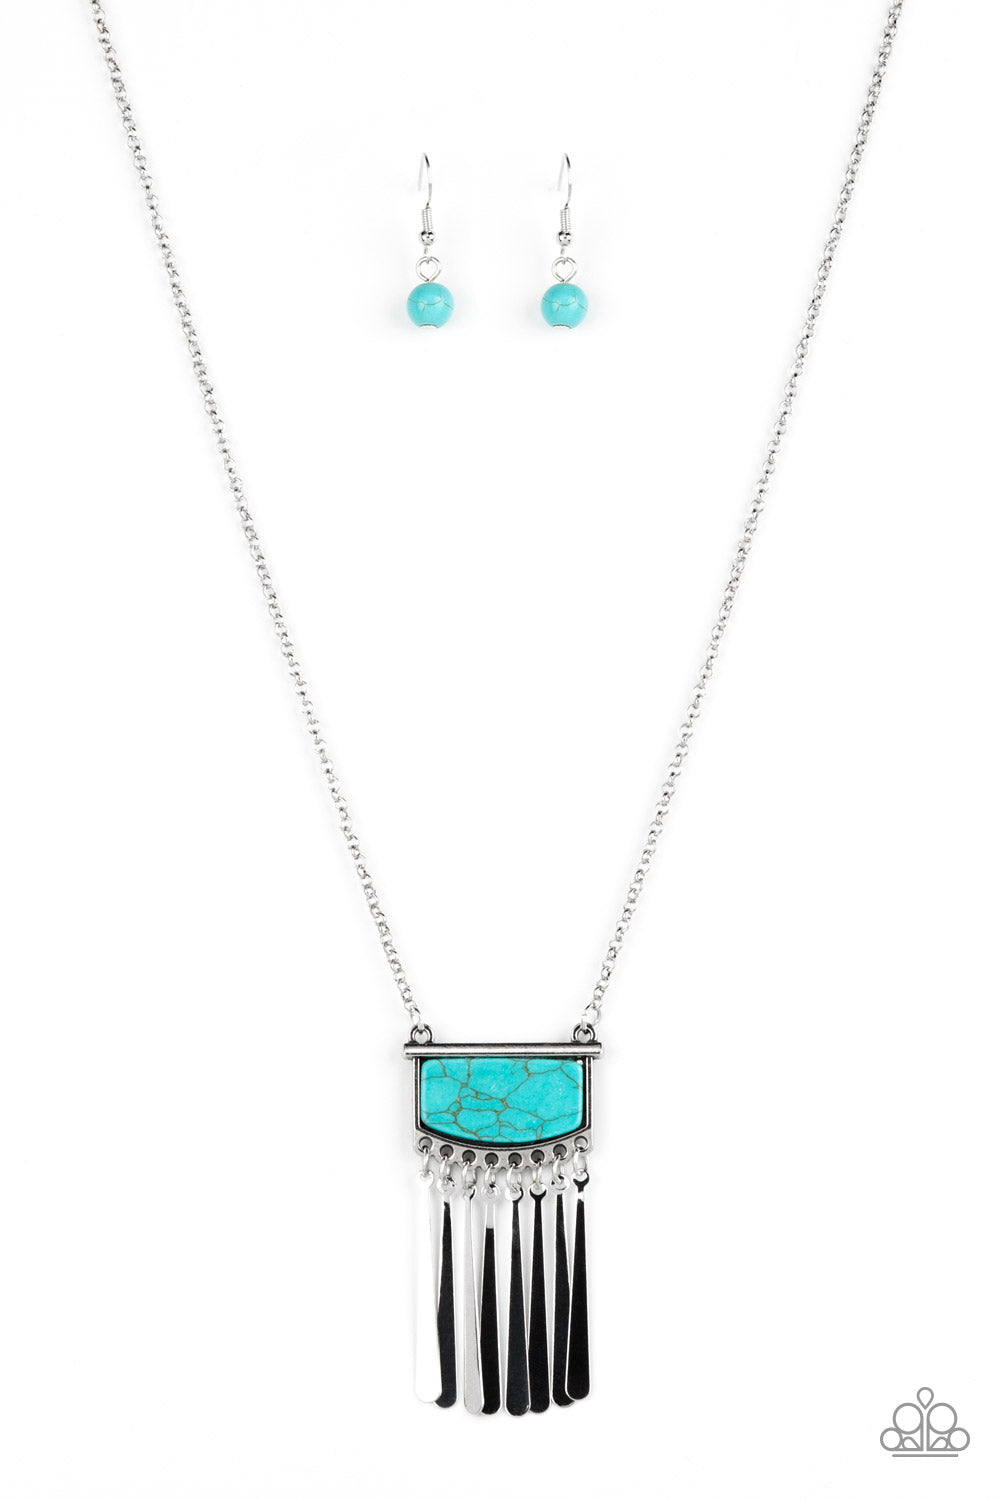 five-dollar-jewelry-plateau-pioneer-blue-necklace-paparazzi-accessories